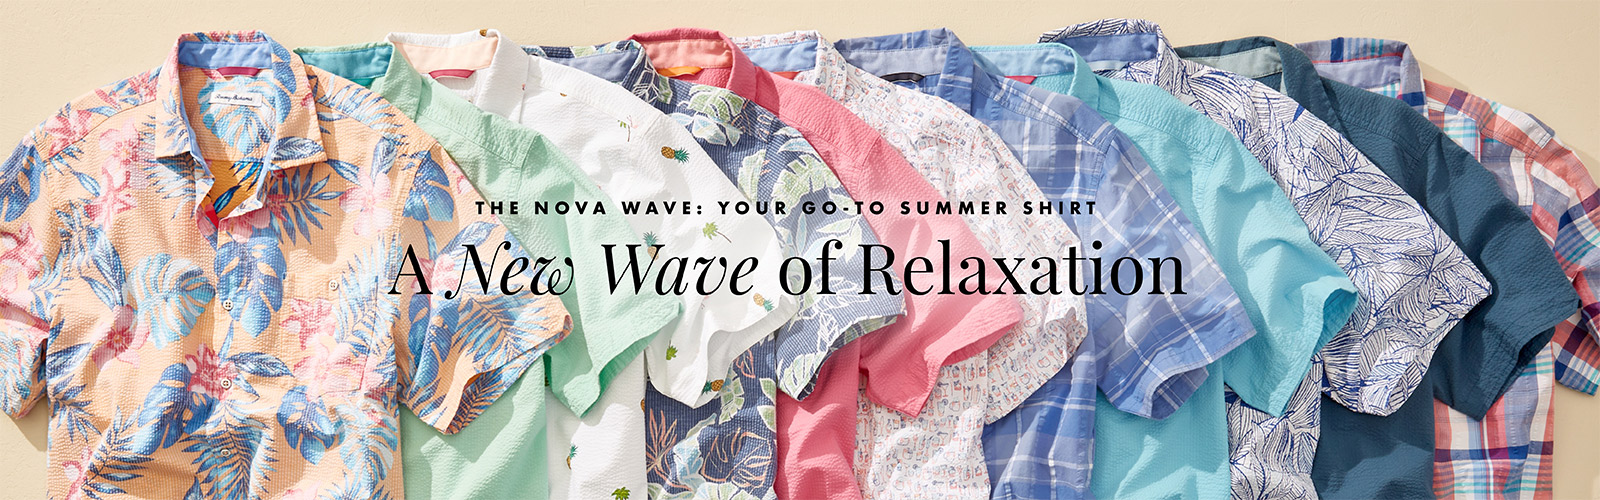 The Nova Wave: Your Go-To Summer Shirt - A New Wave of Relaxation